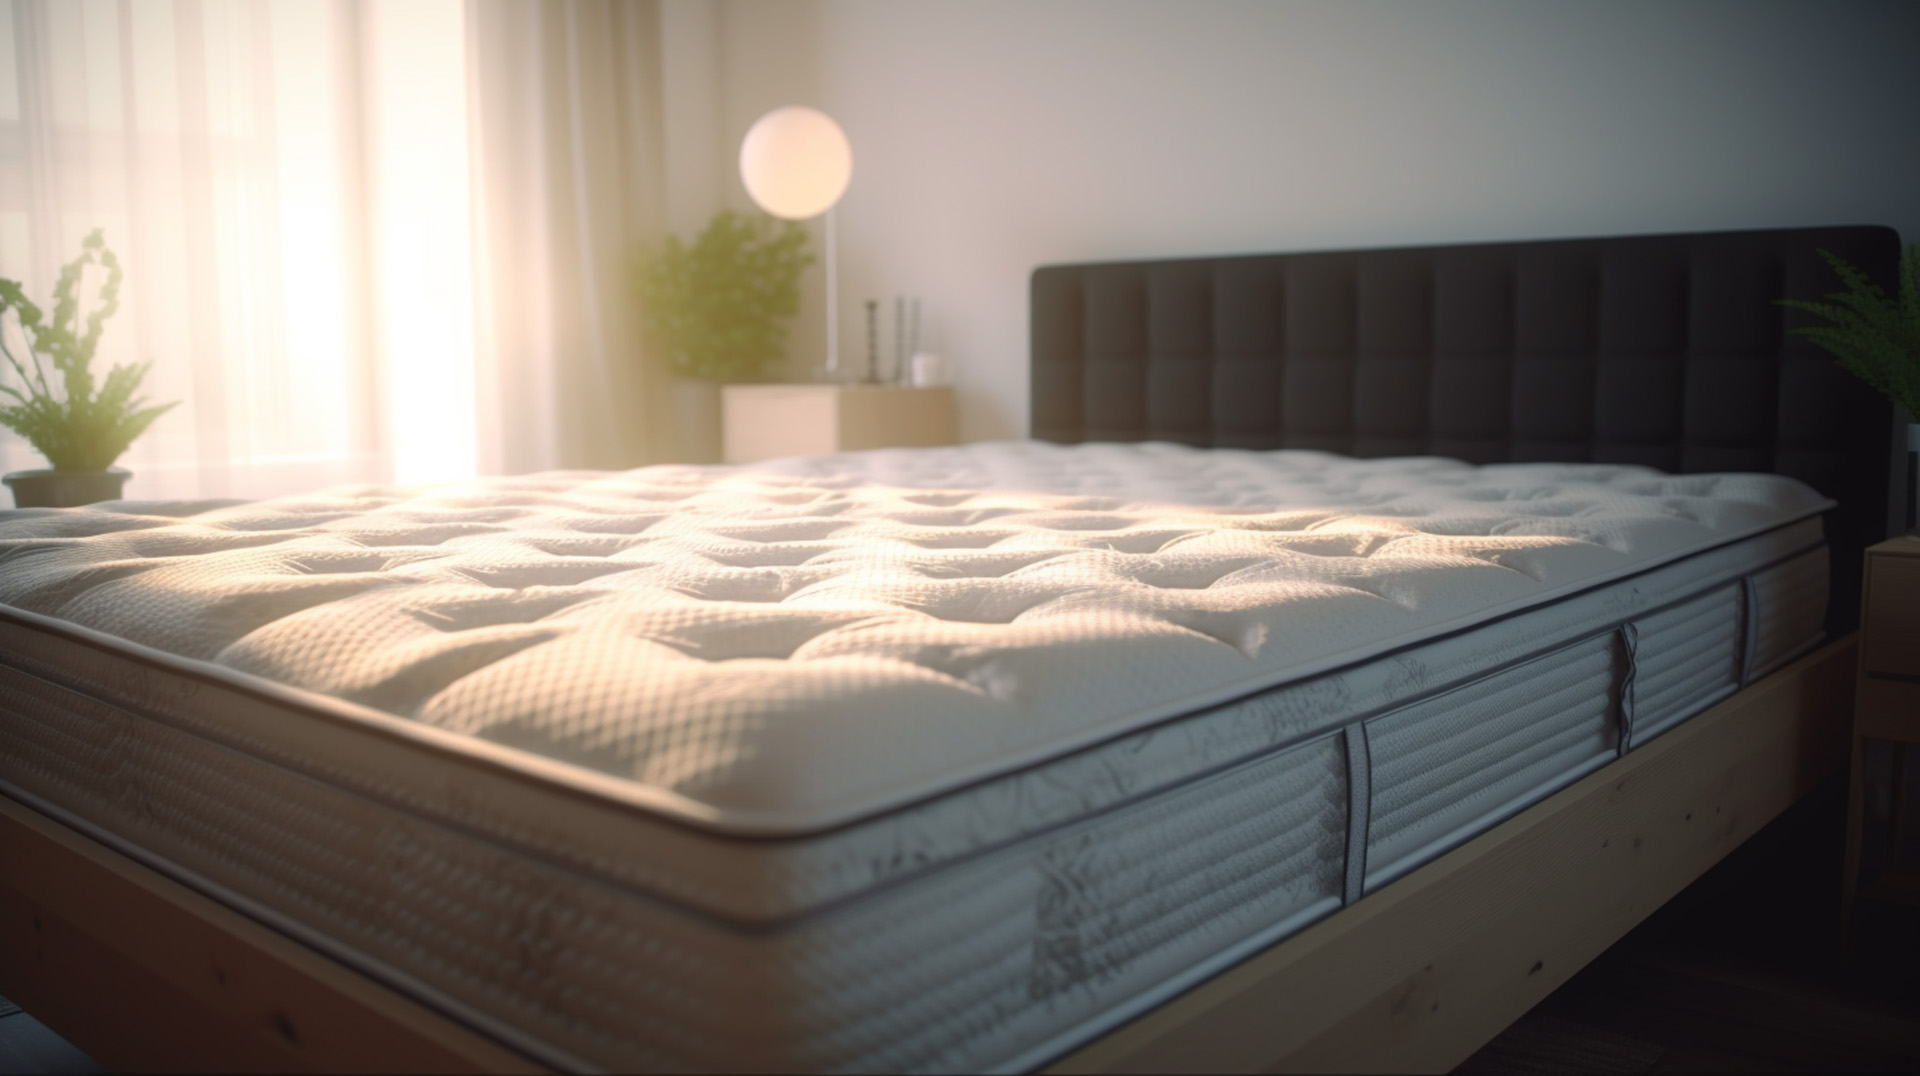 Shop Organic Mattresses and Beds in Woodland Hills, CA